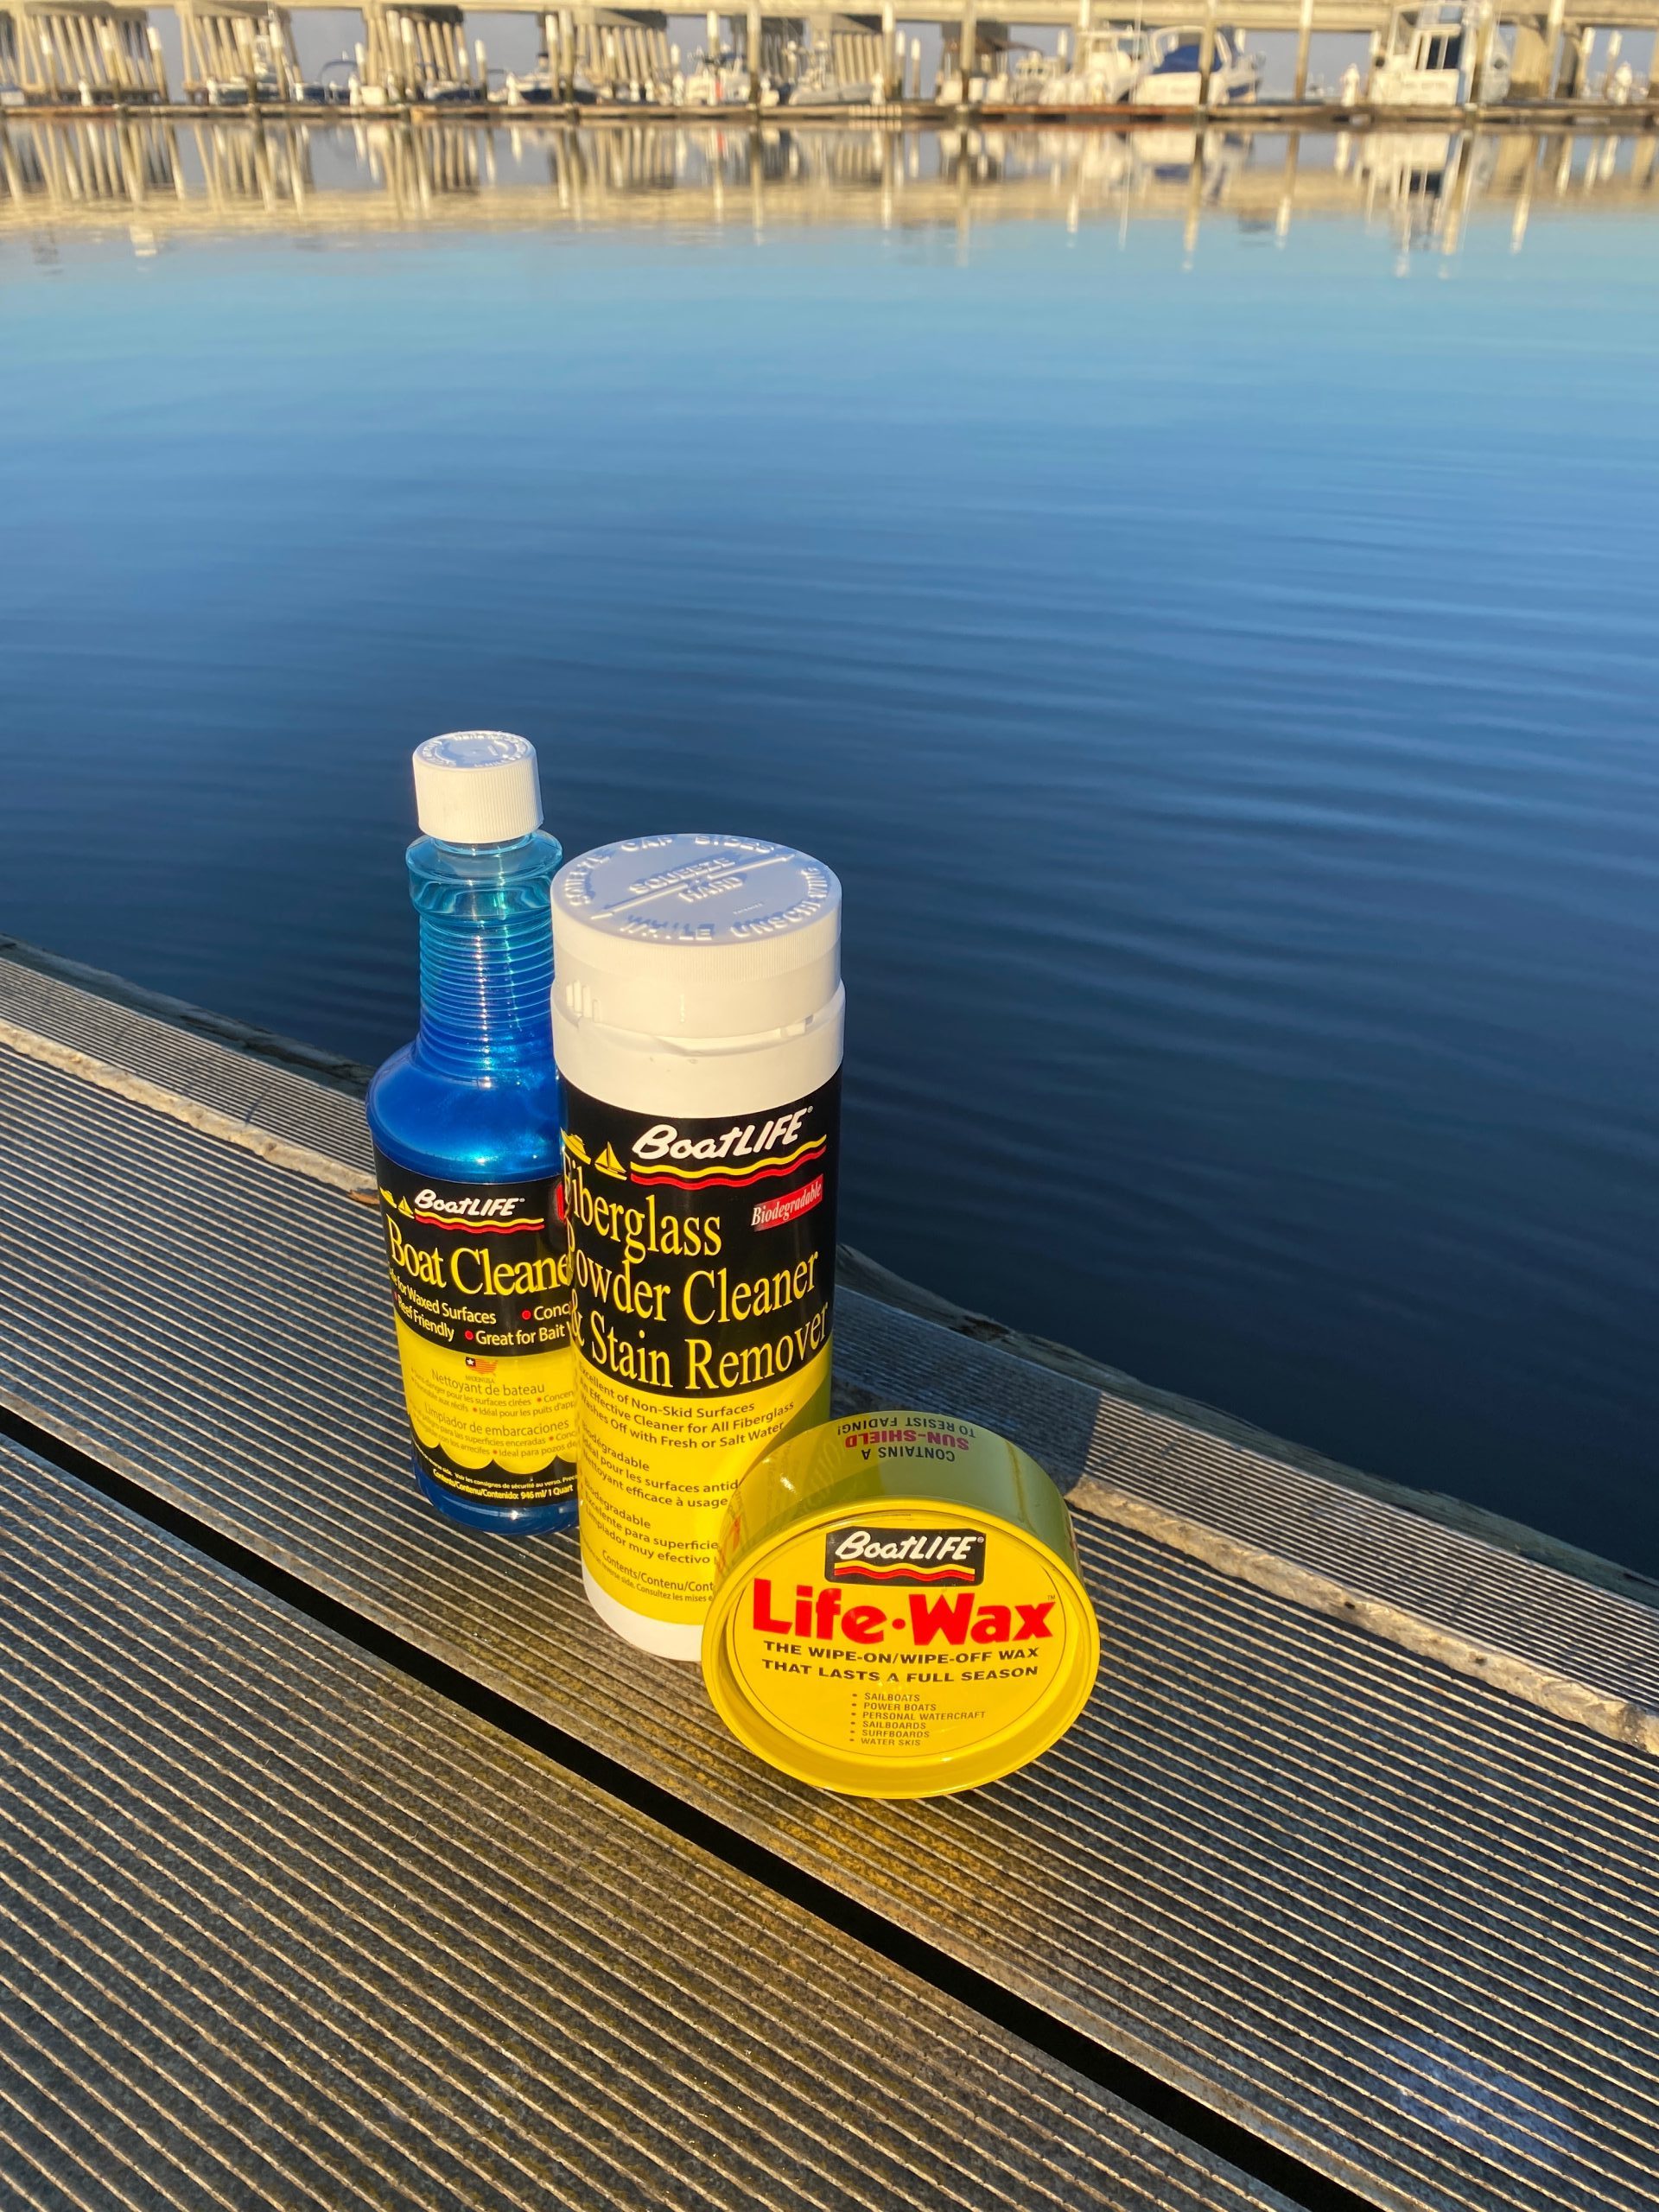 Boat Cleaner, Fiberglass Powder Cleaner and LifeWax on dock